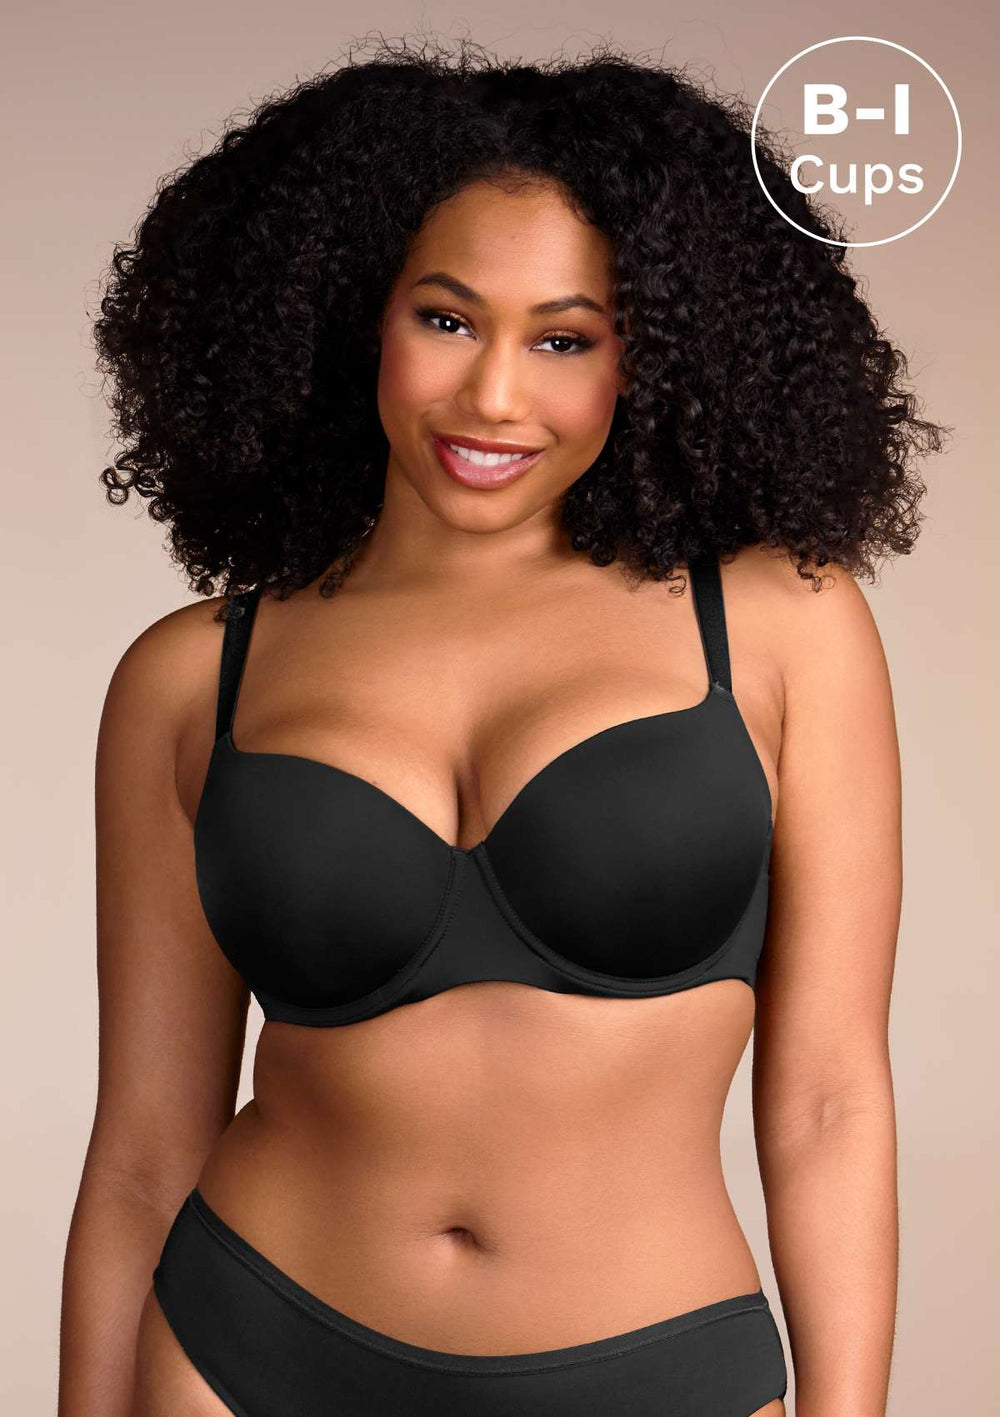 Padded Bras, Plus Size Padded Bras in Cup Size A-K